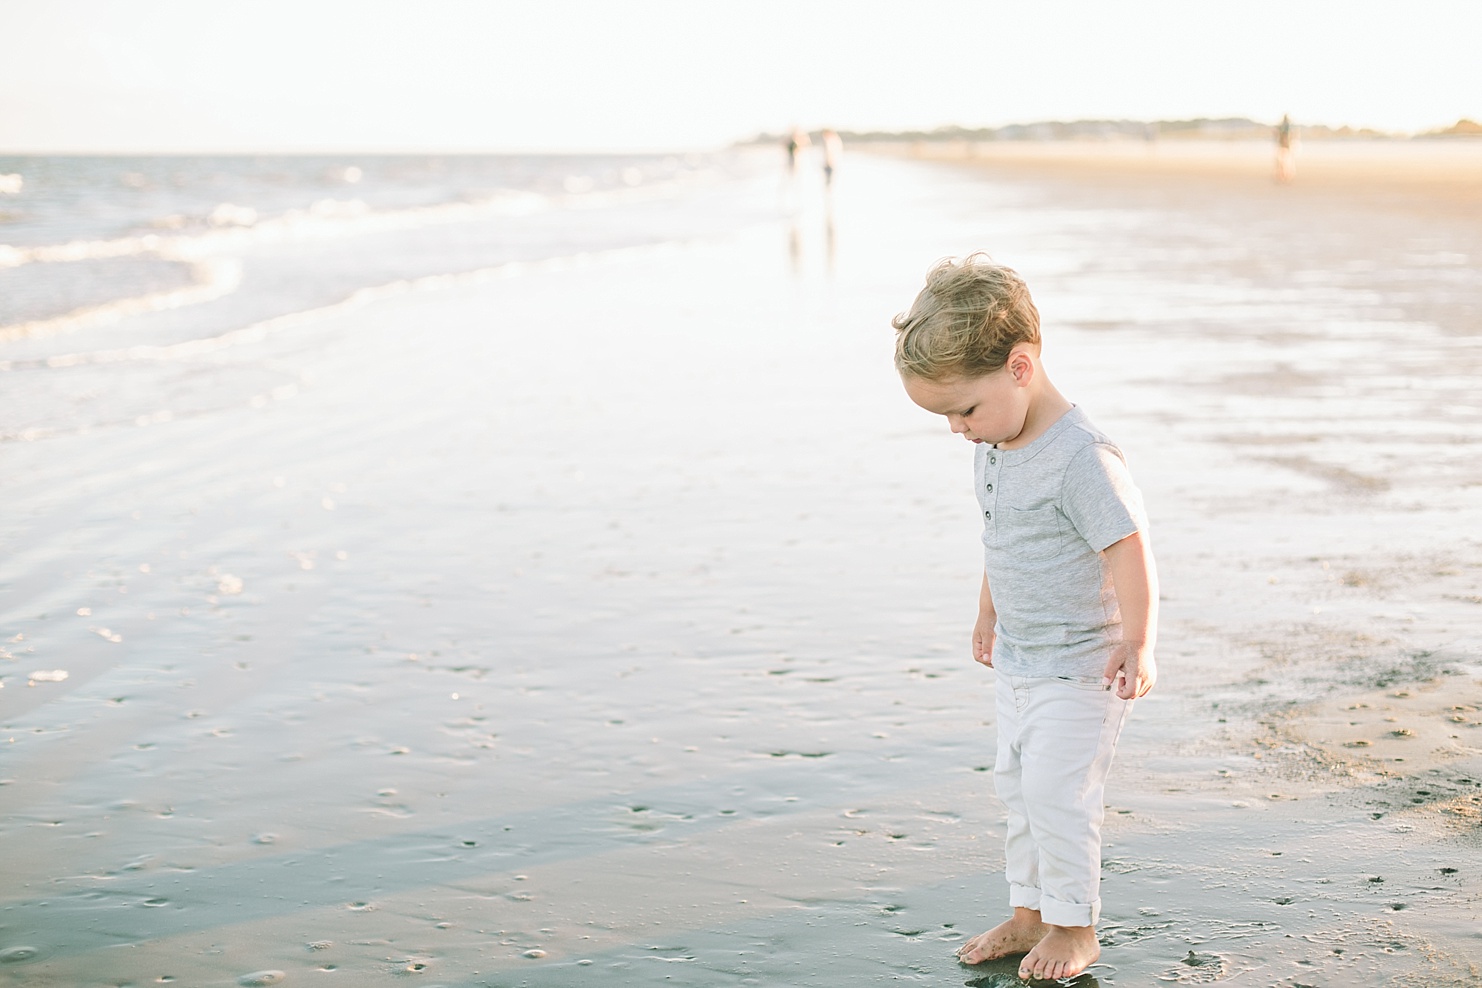 Little boy on beach at edge of water